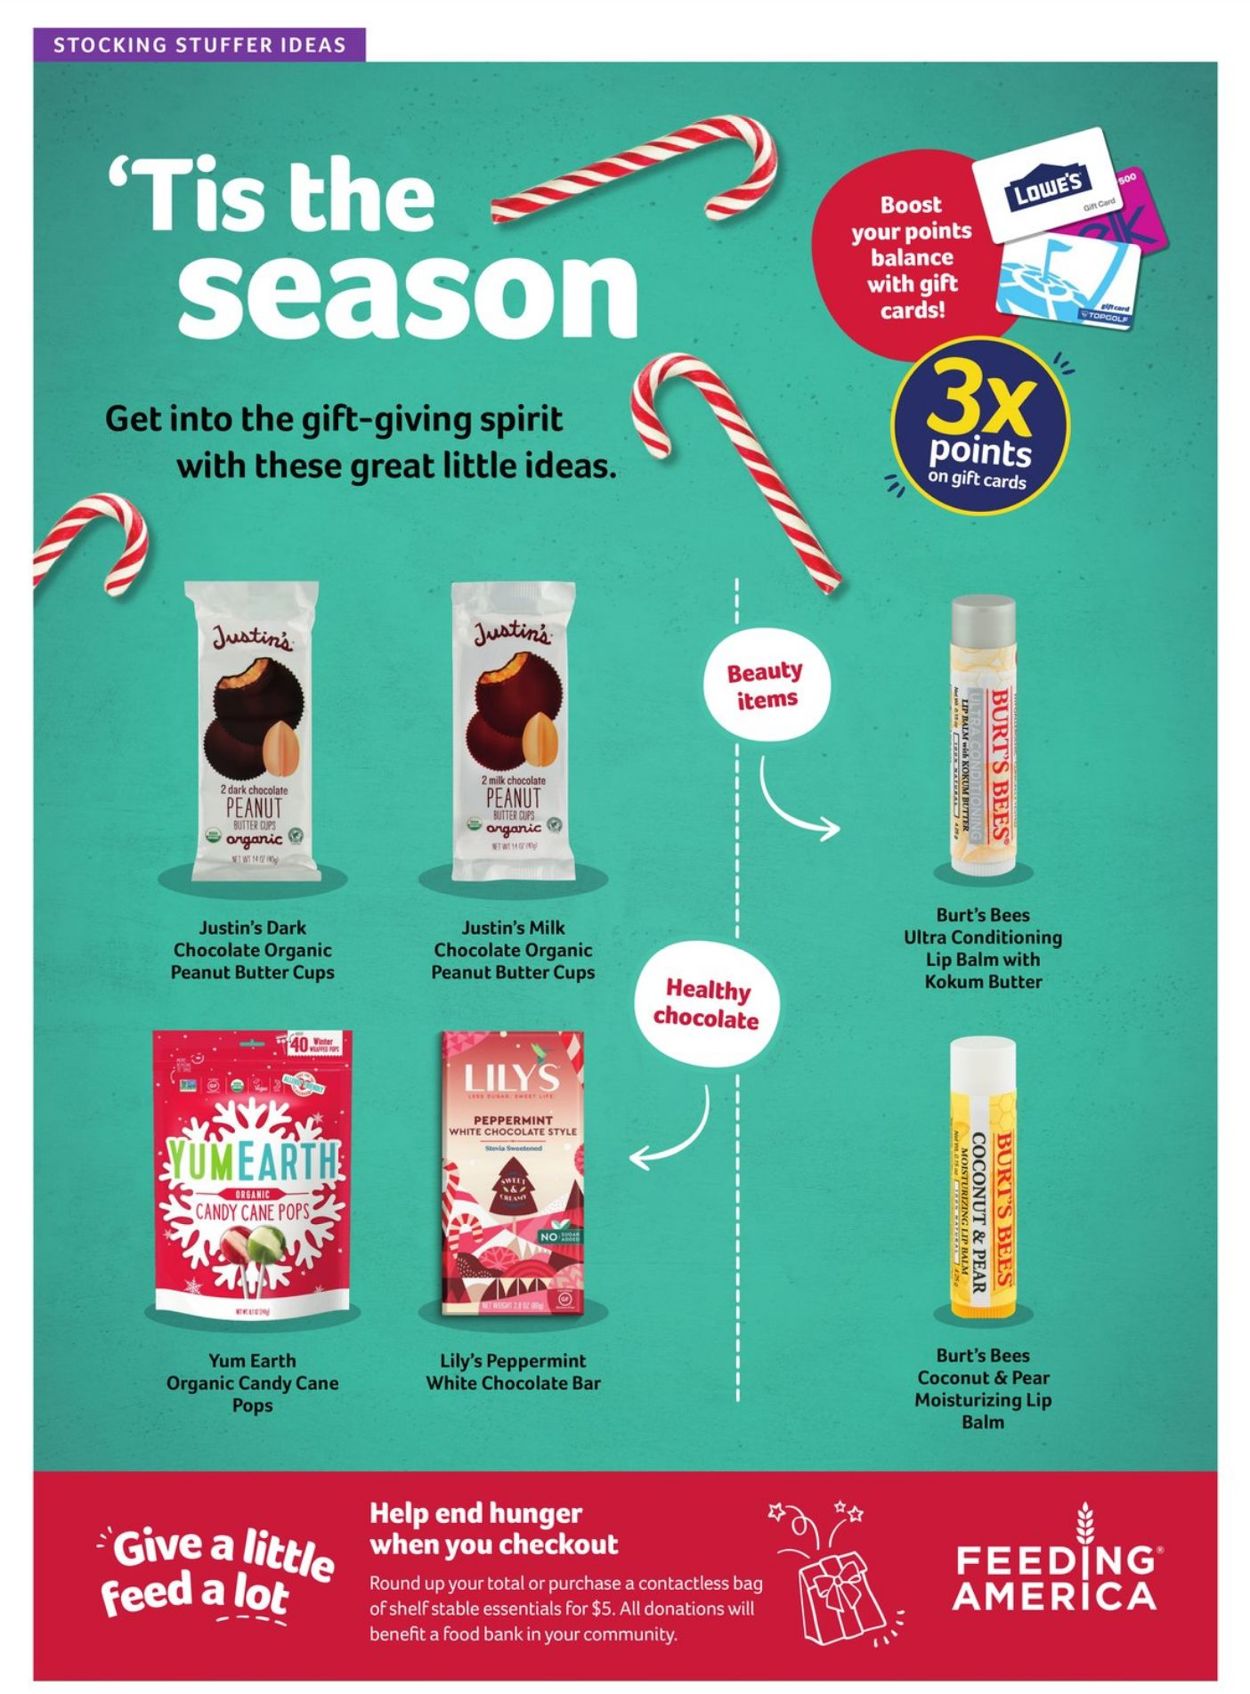 Winn Dixie Holiday 2020 Current weekly ad 11/27 12/29/2020 [8